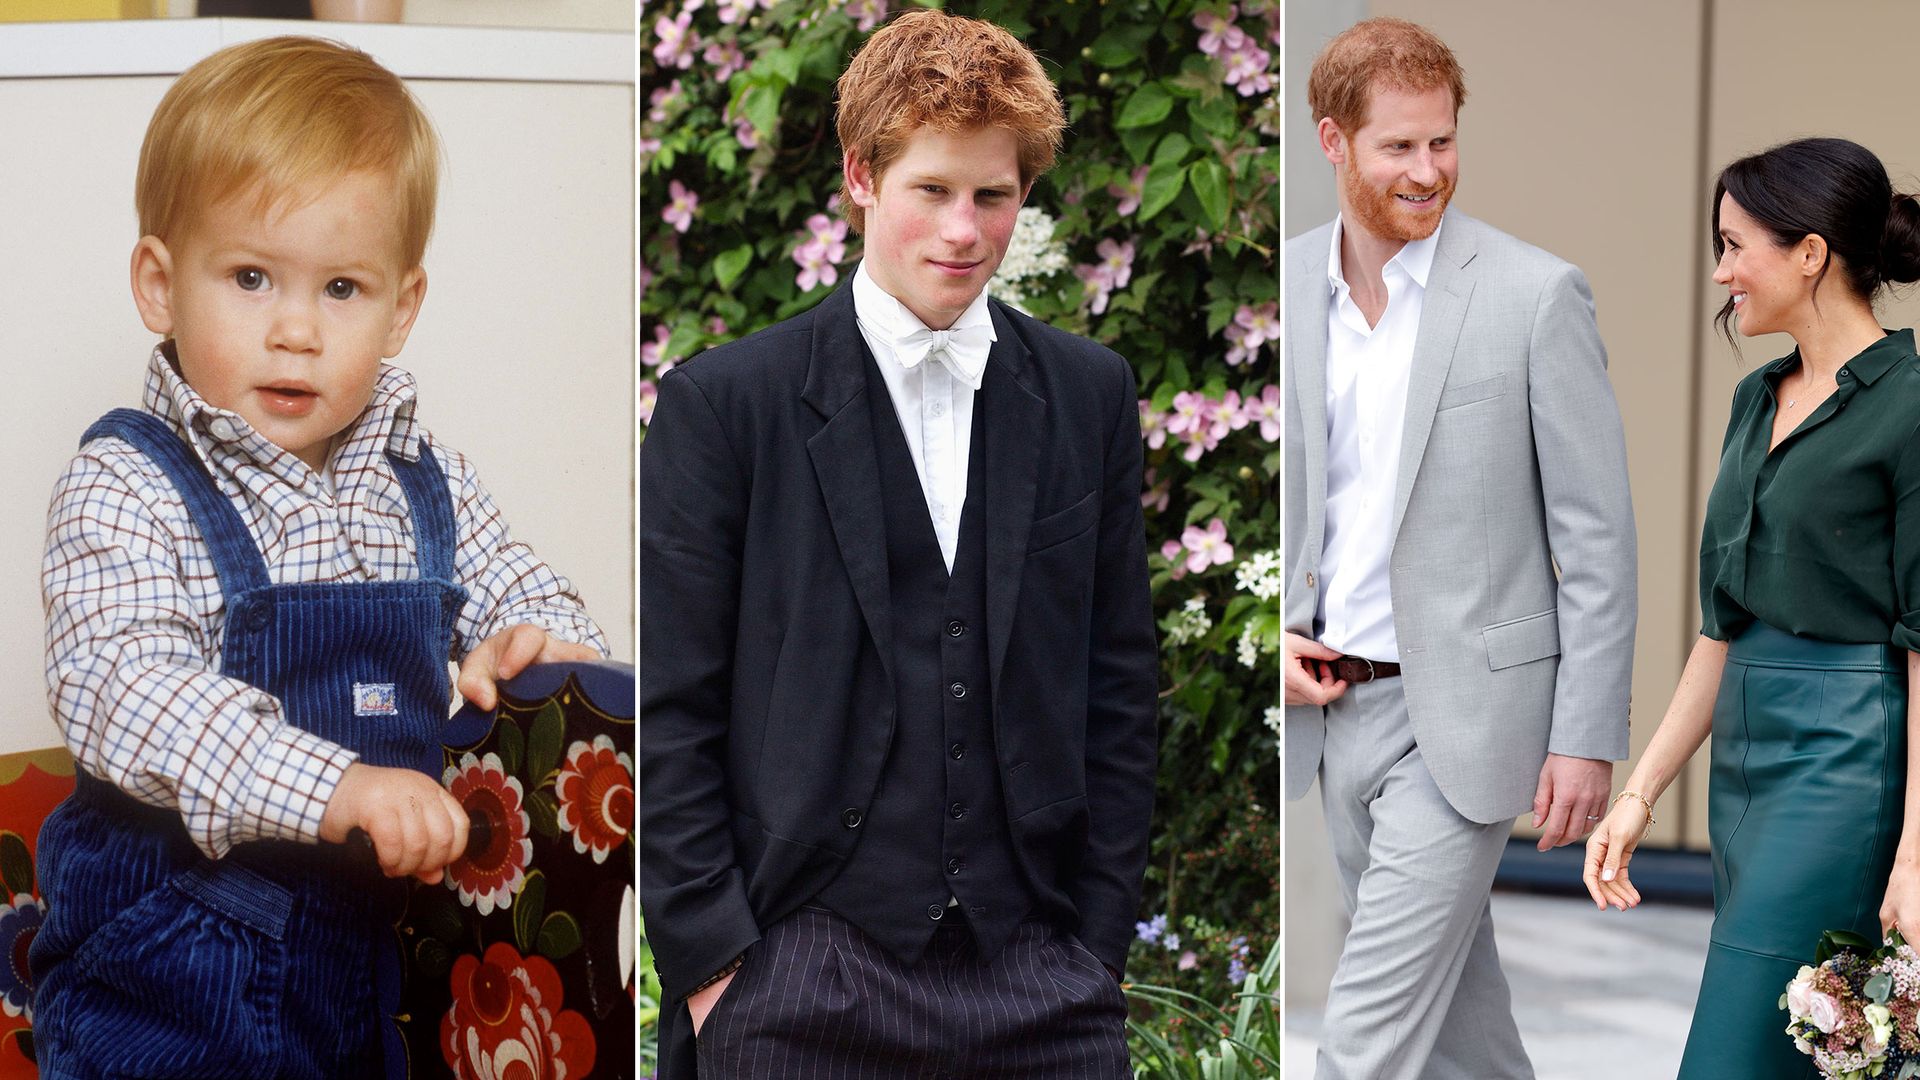 Prince Harry as a baby, at school and with Meghan Markle